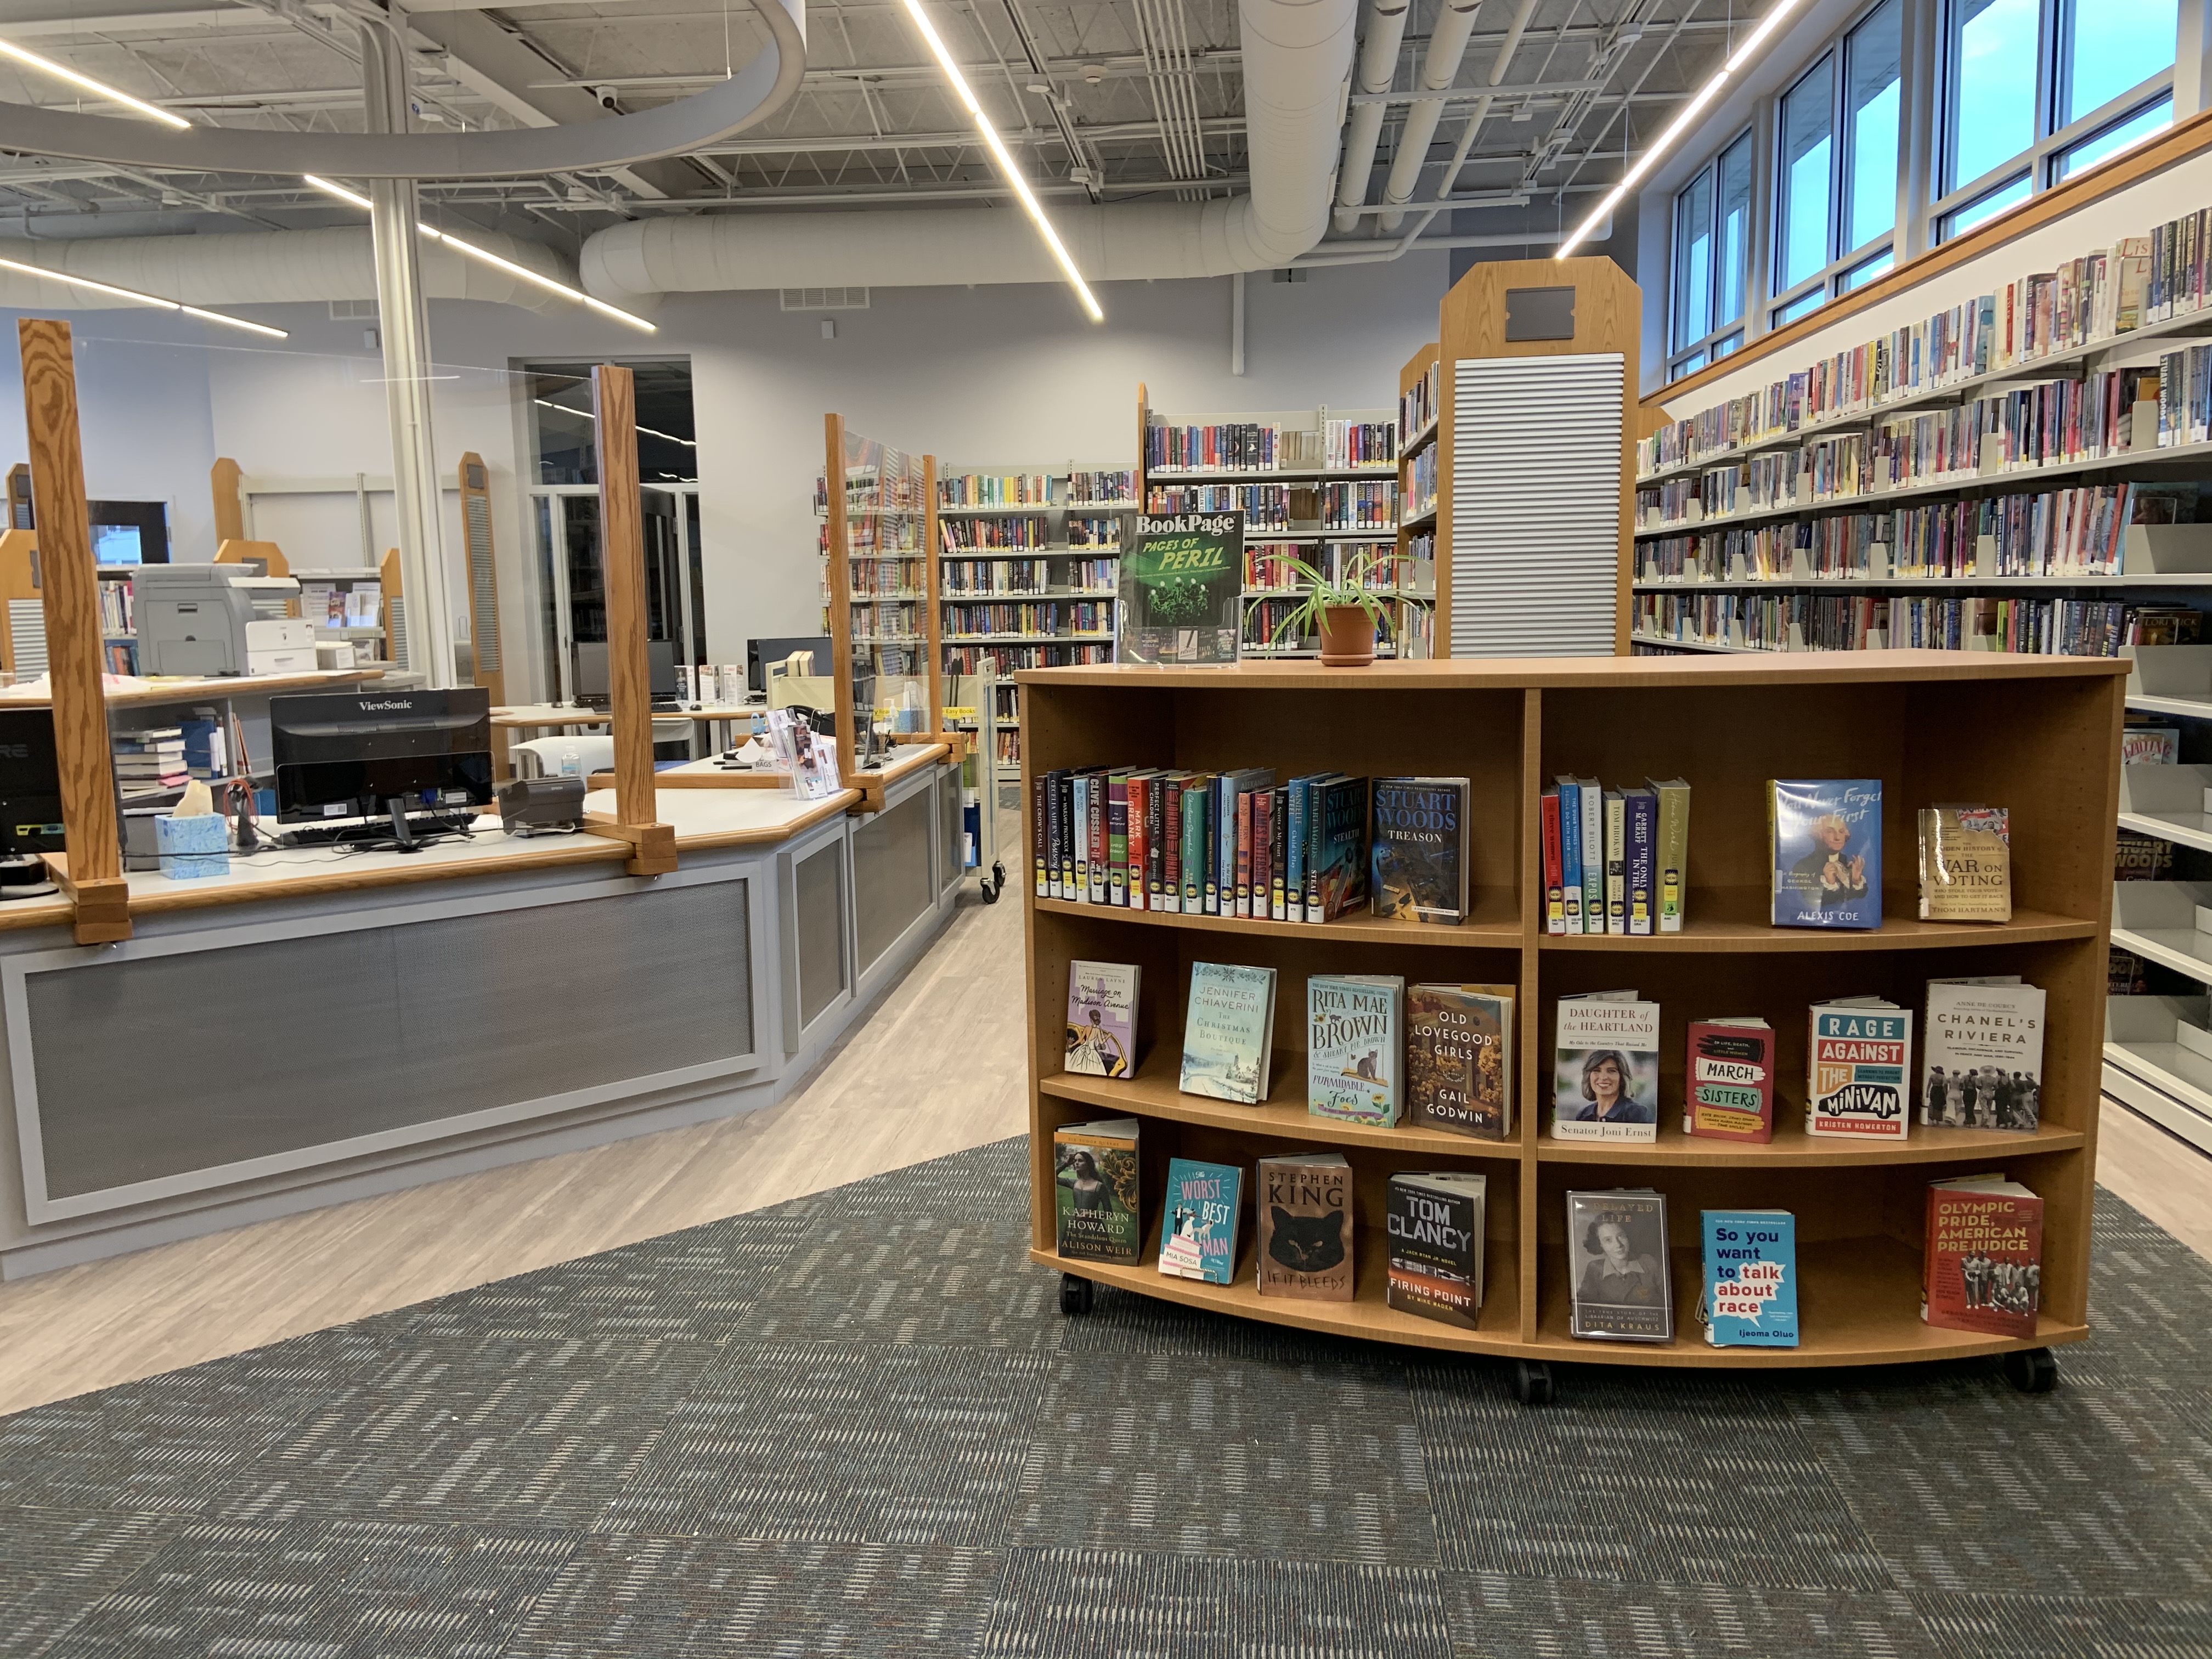 The New Fleetwood Library